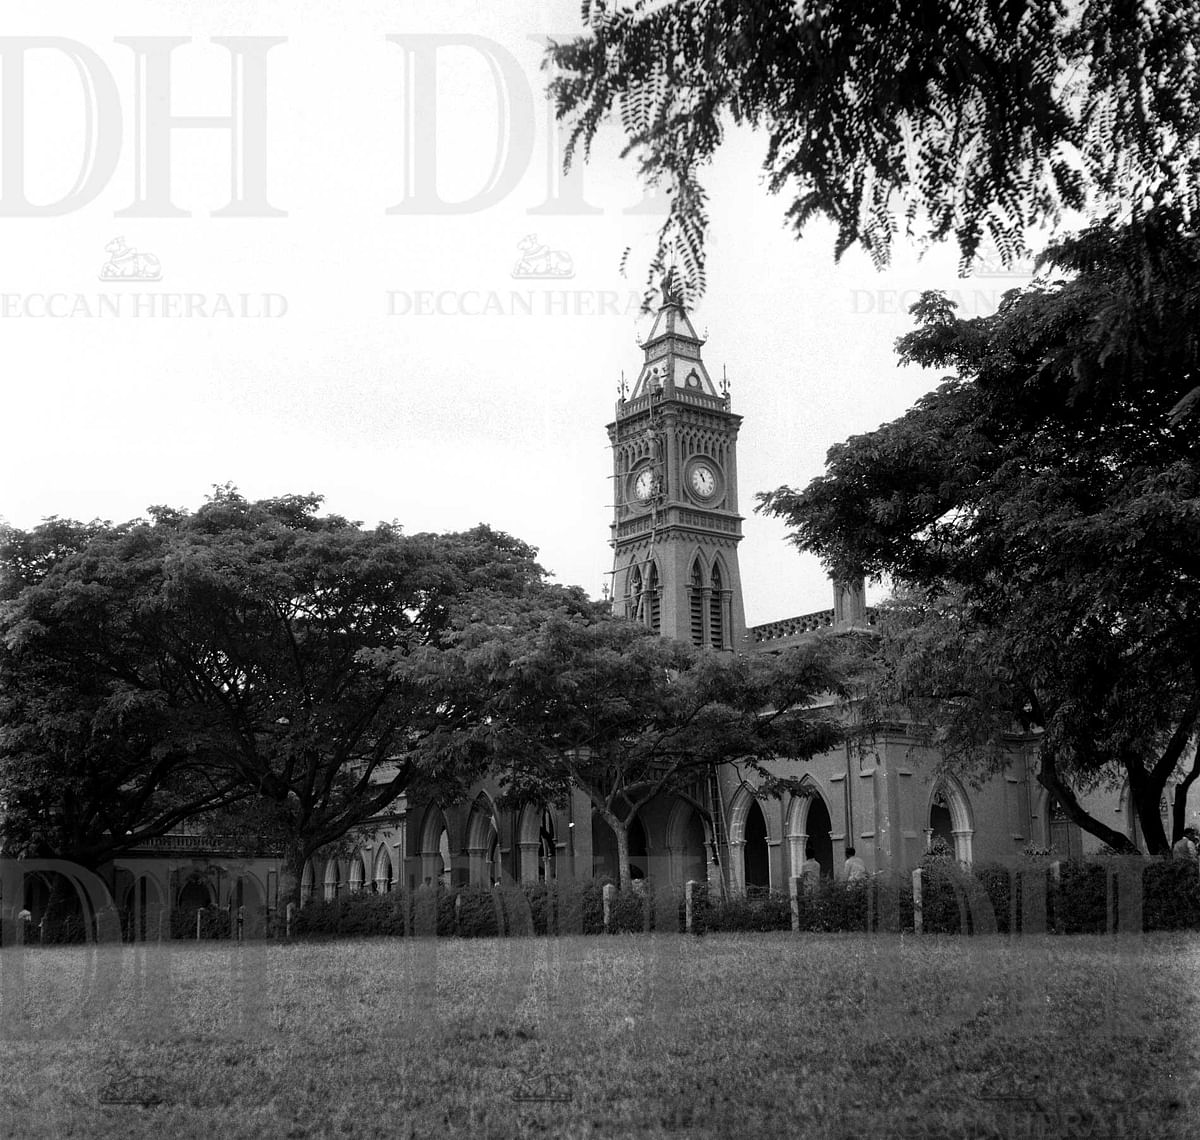 One of the oldest colleges in the country, Central College, clicked in 1958. DH Photo